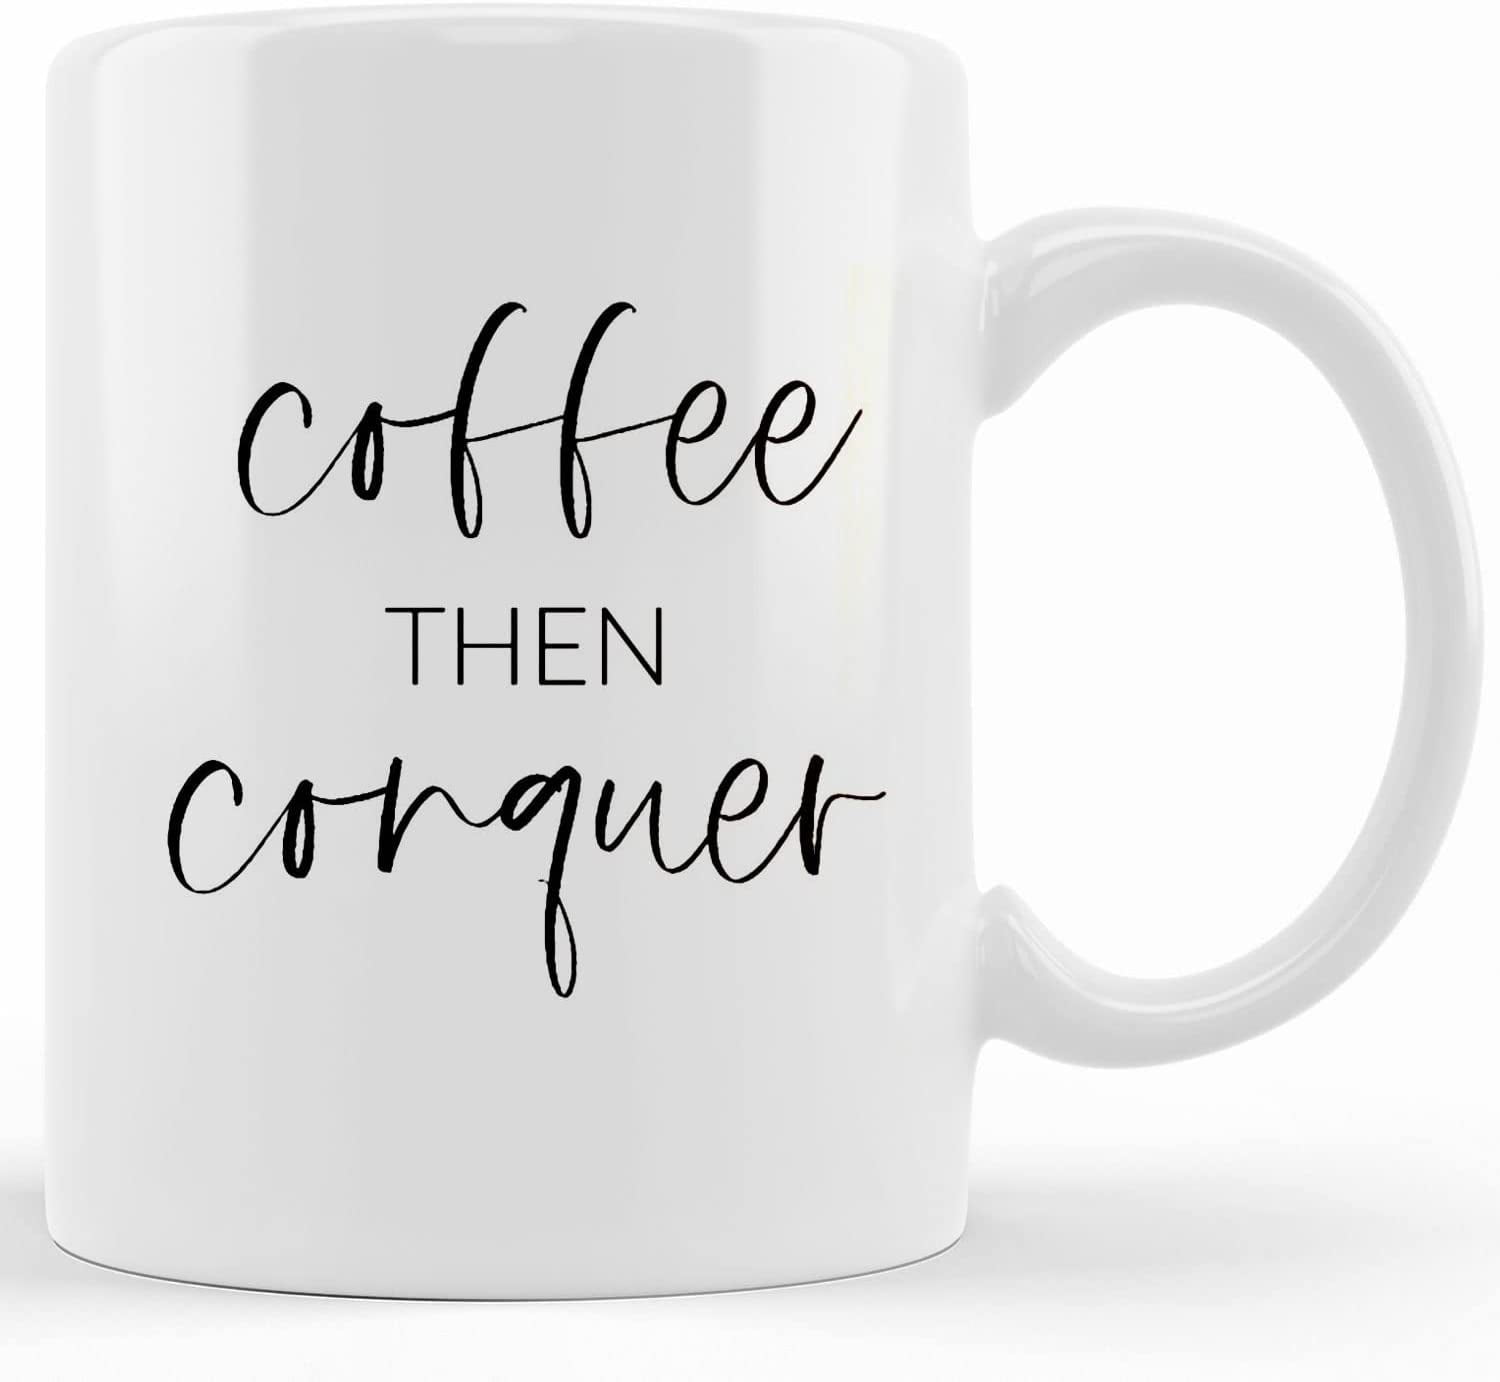  Romantic Money Gold Digger Quote Quirky 325ml Mug Coffee Tea  Funny Novelty Mug Ceramic White 11 Ounce Great Gift Idea Meme Cup Mug Only  : Home & Kitchen